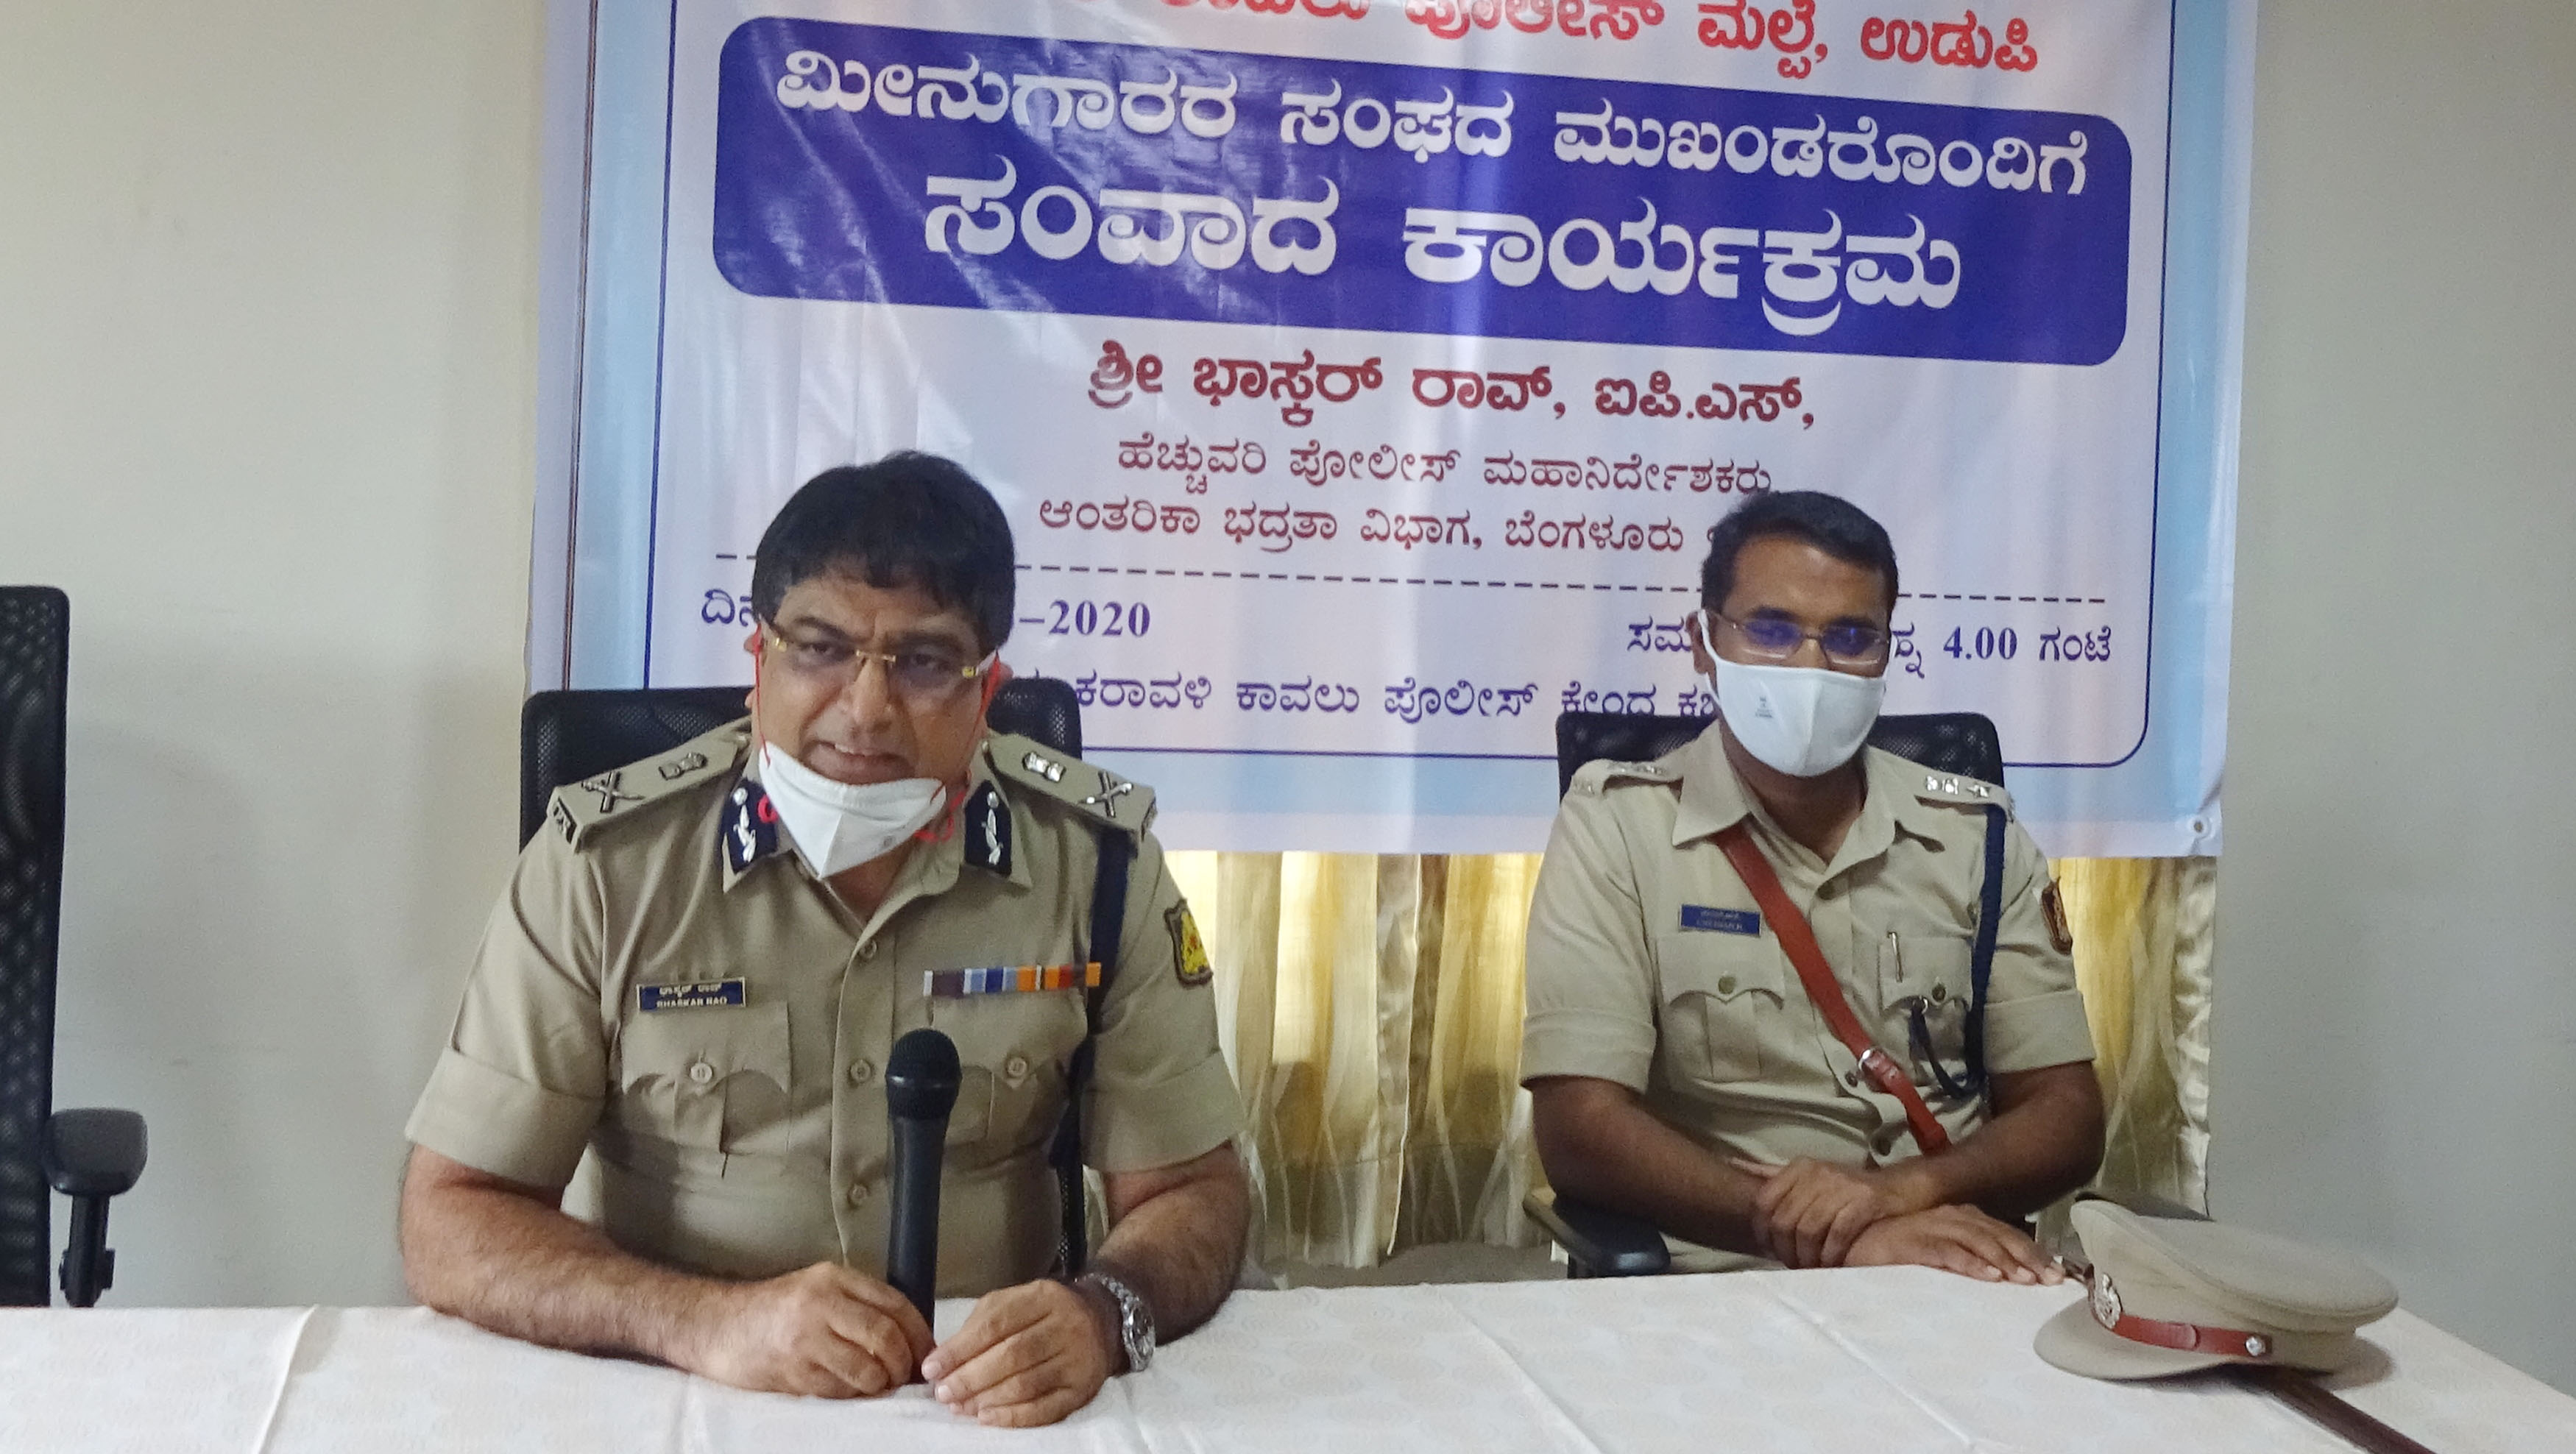 Modern technology to be used for Internal Security - Bhaskar Rao, ADGP